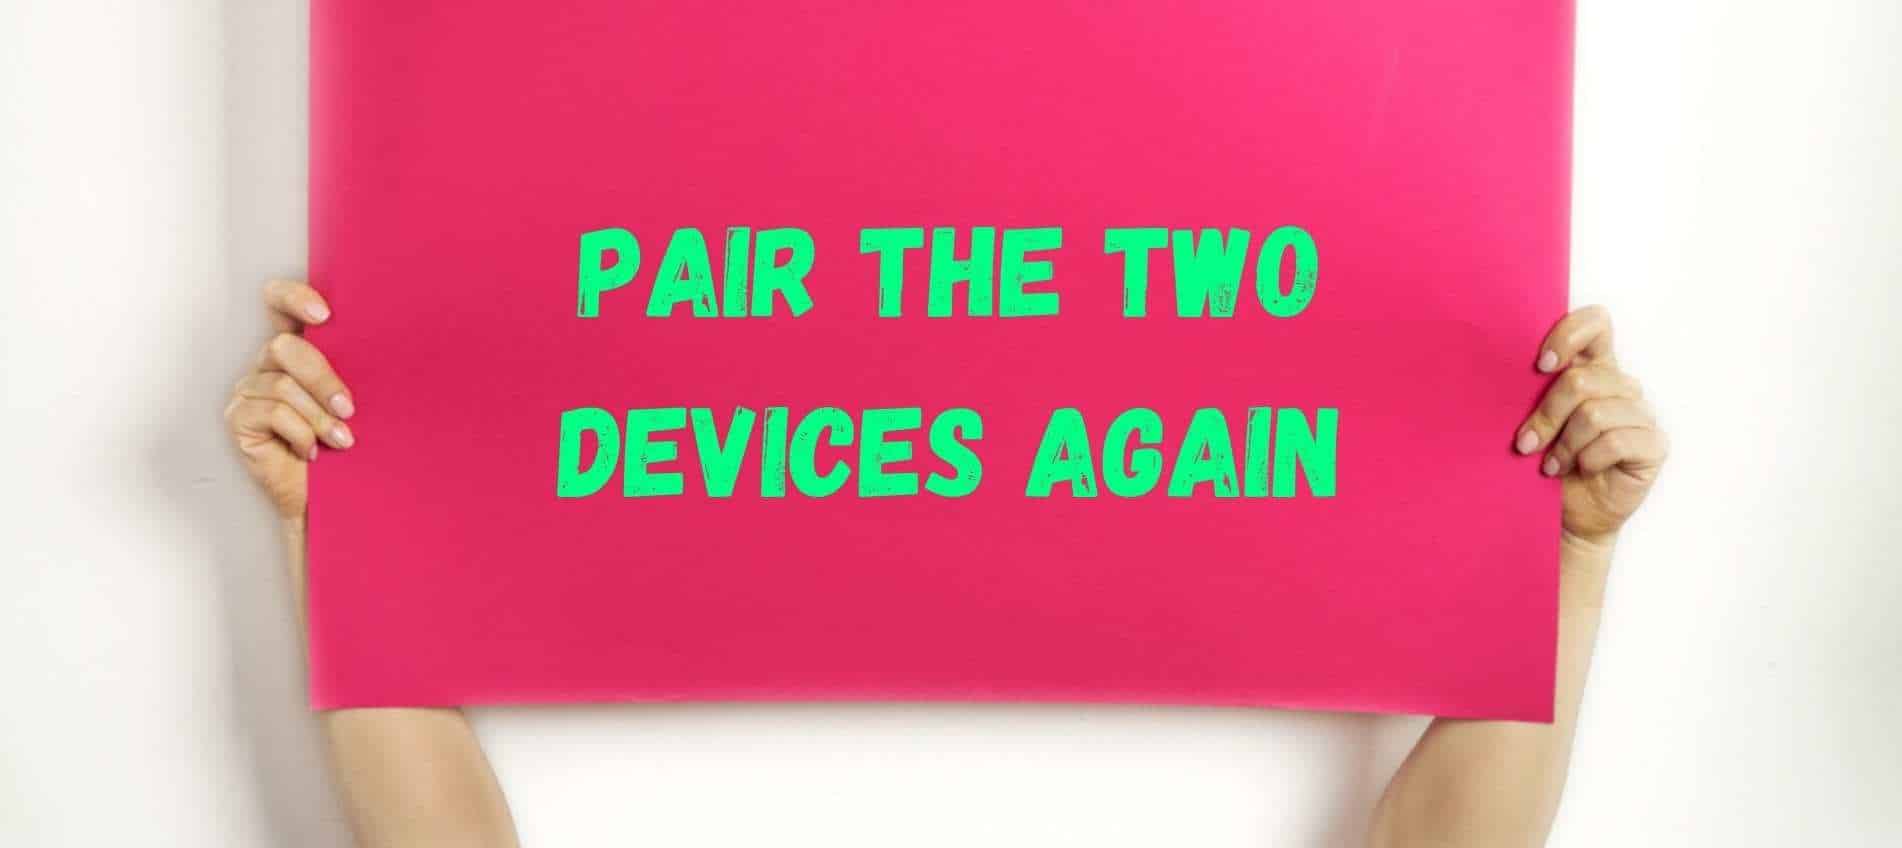 Pair the two devices again